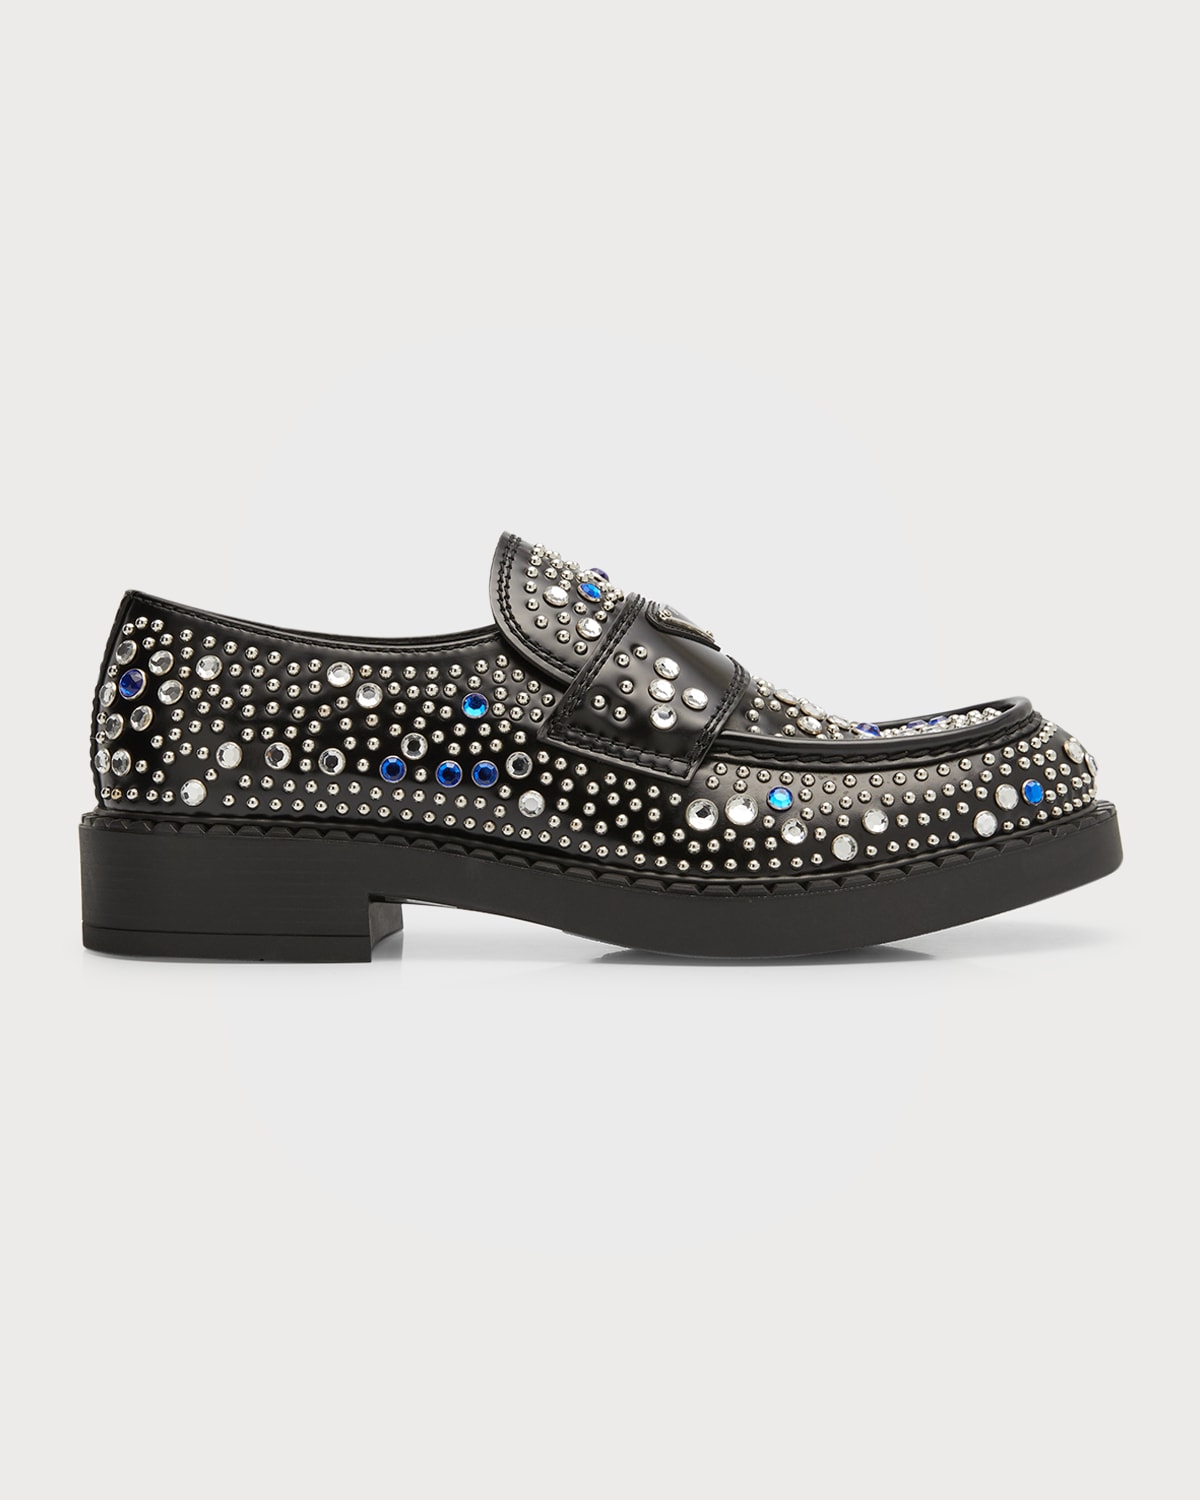 Prada Brushed Leather Loafers With Studs And Rhinestones In Black